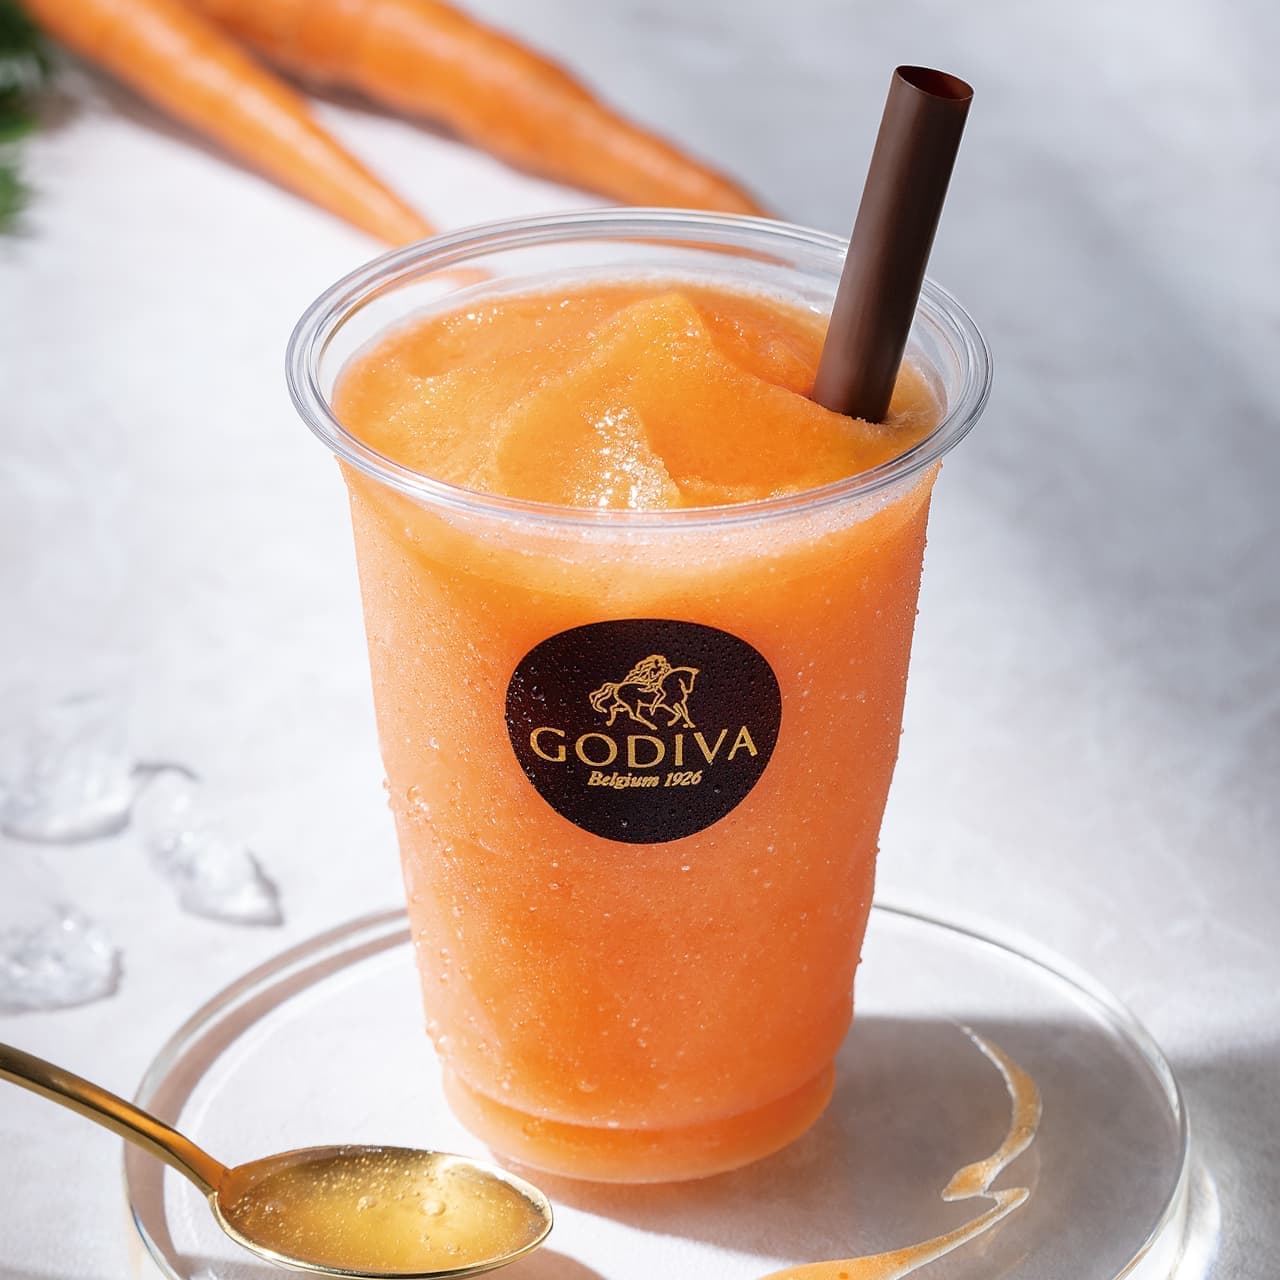 Godiva "Cacao Fruit Juice with Carrot